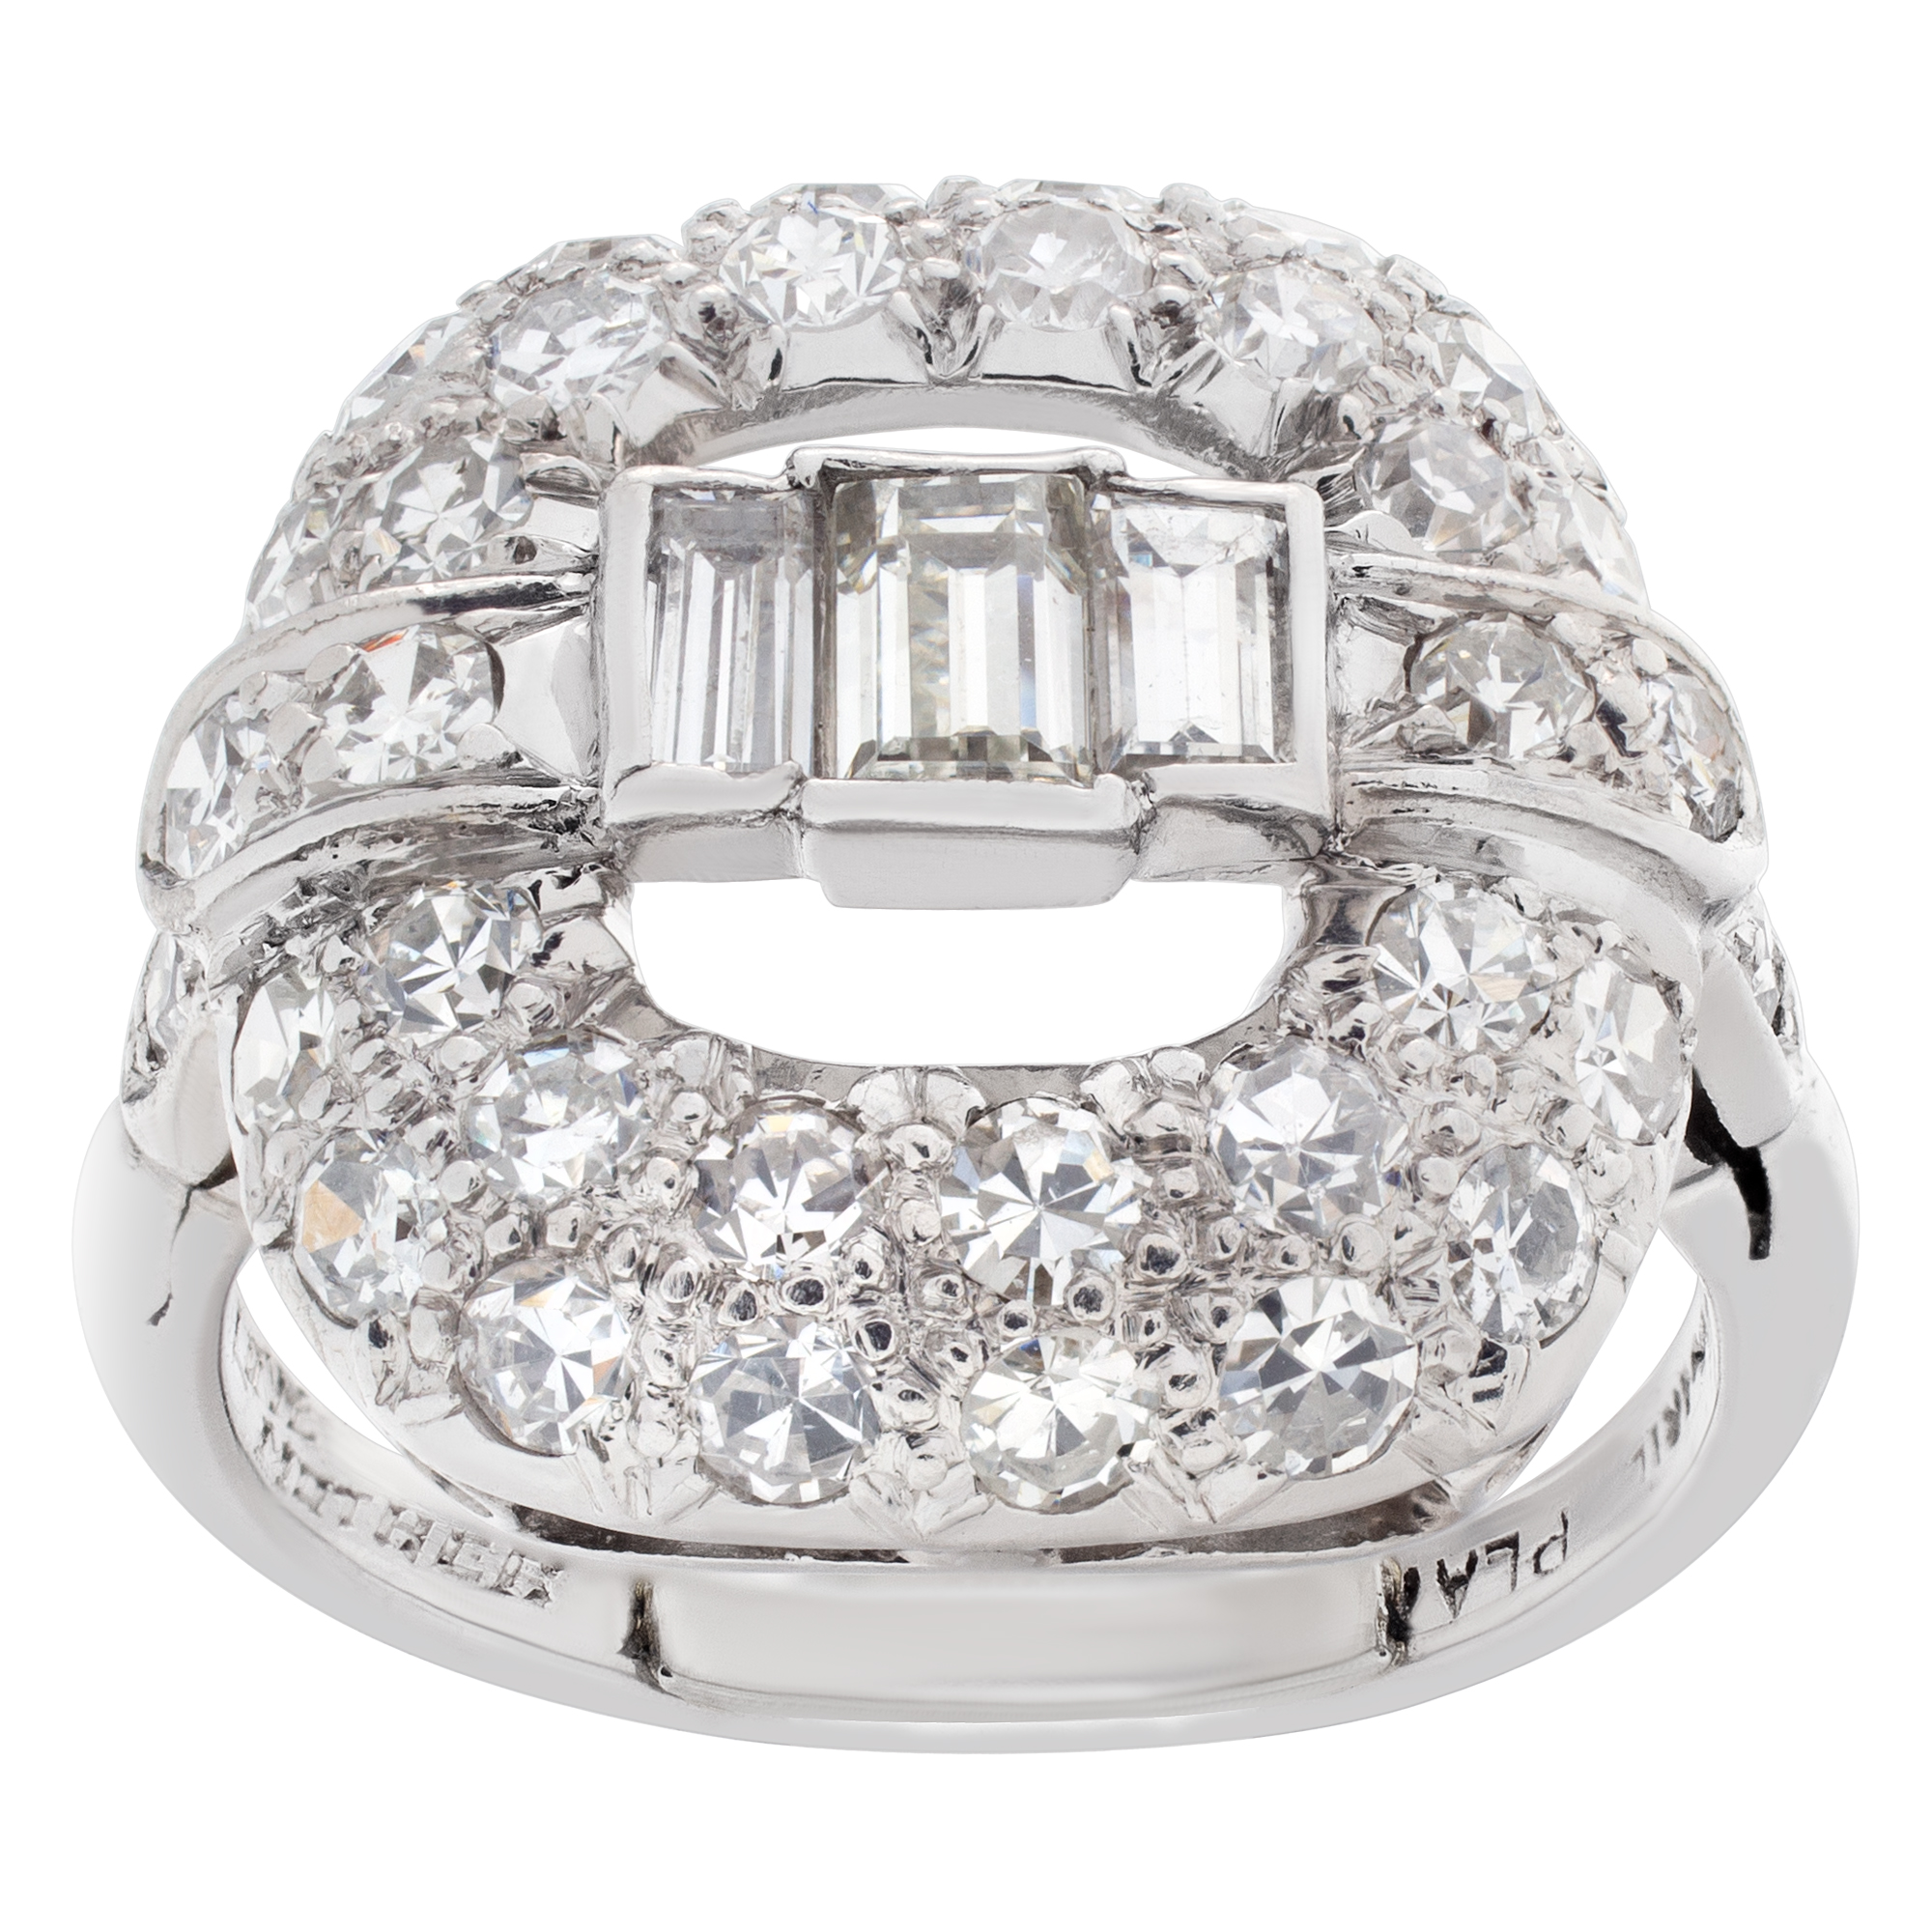 Vintage Platinum diamond ring with approximately 0.88 carats in diamonds.